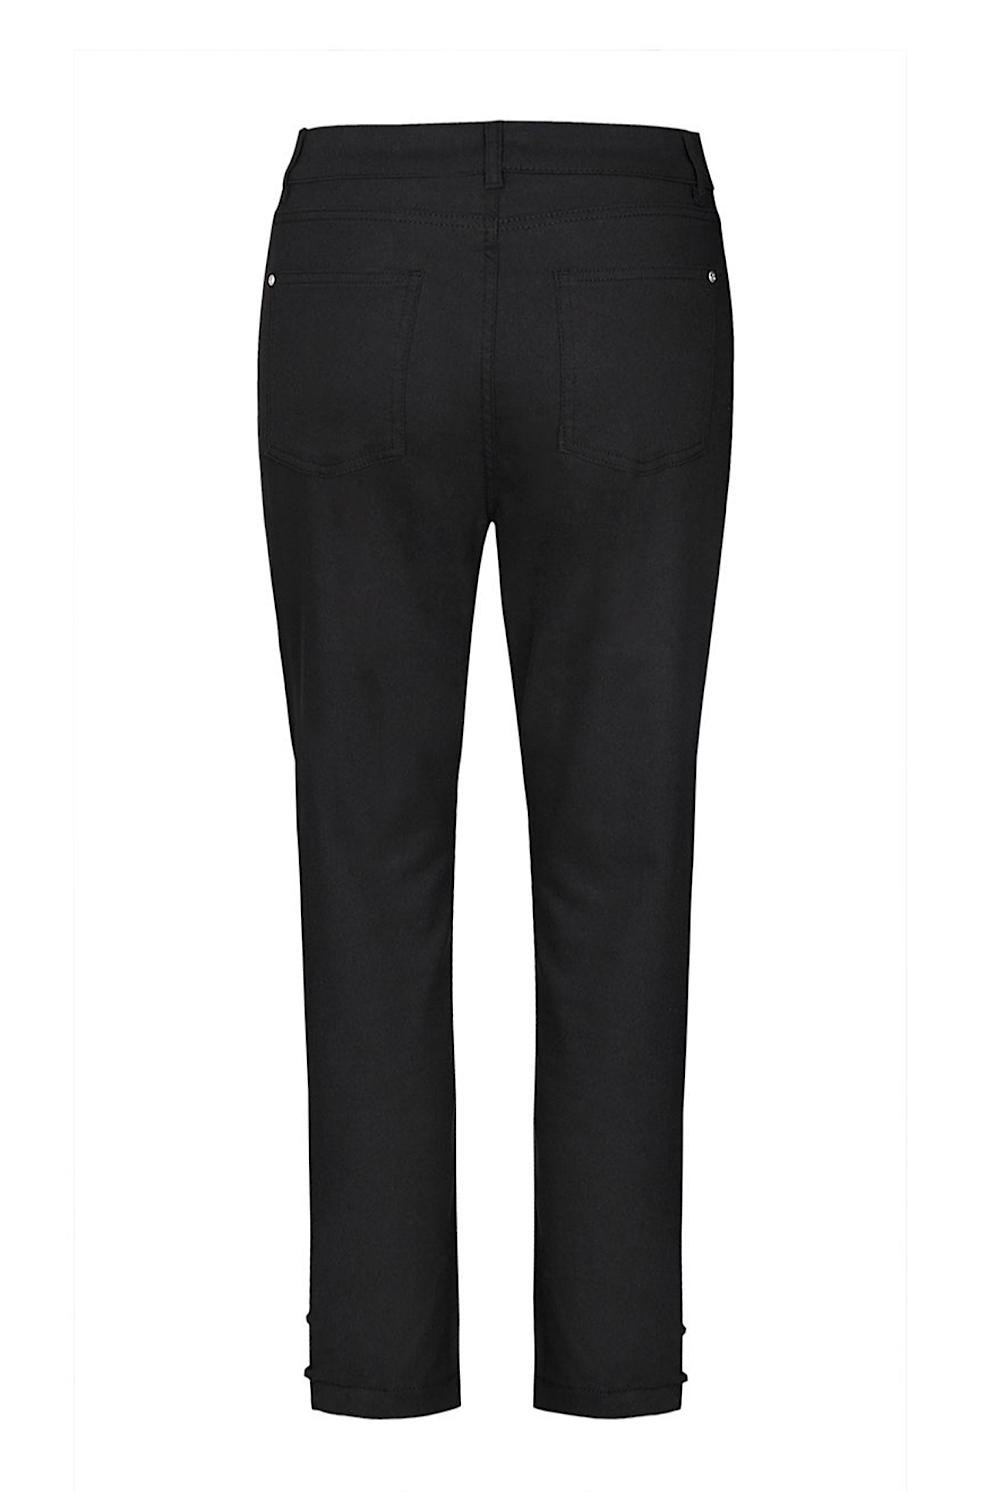 Dolcezza Cropped Cut Out Detail Pant 22202 Black